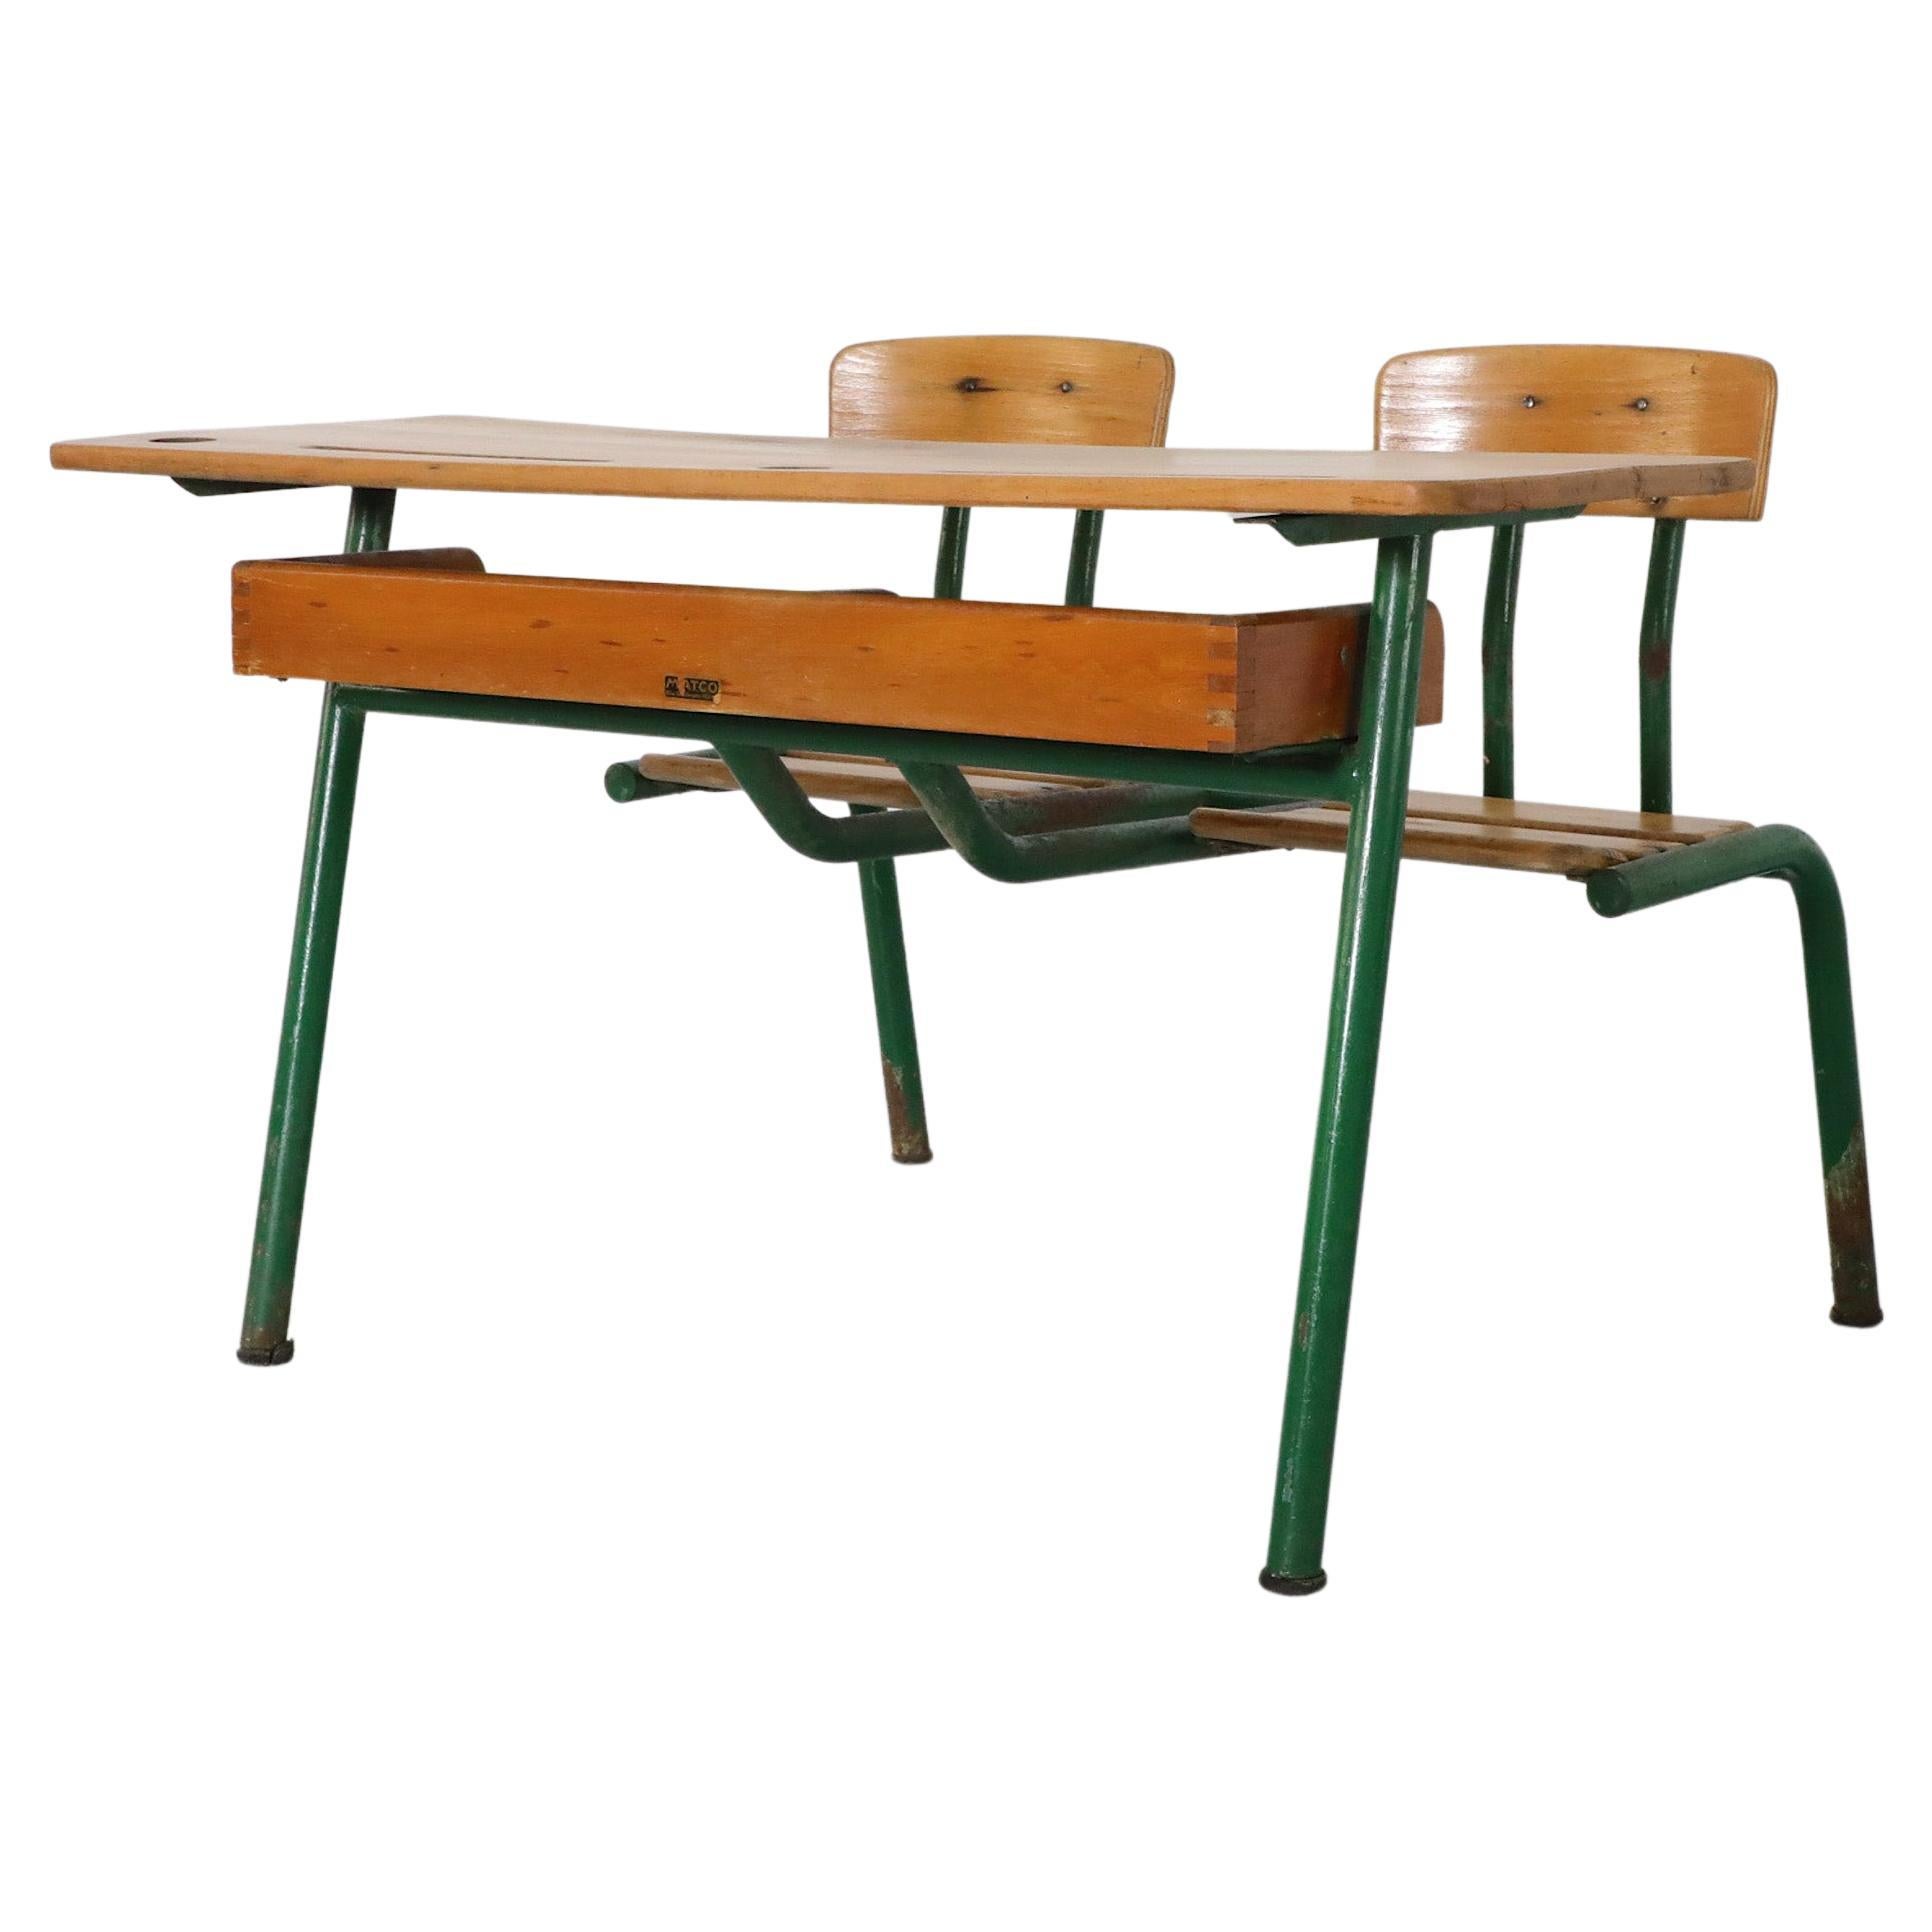 Industrial 1950s French Tandem School Desk by Matco